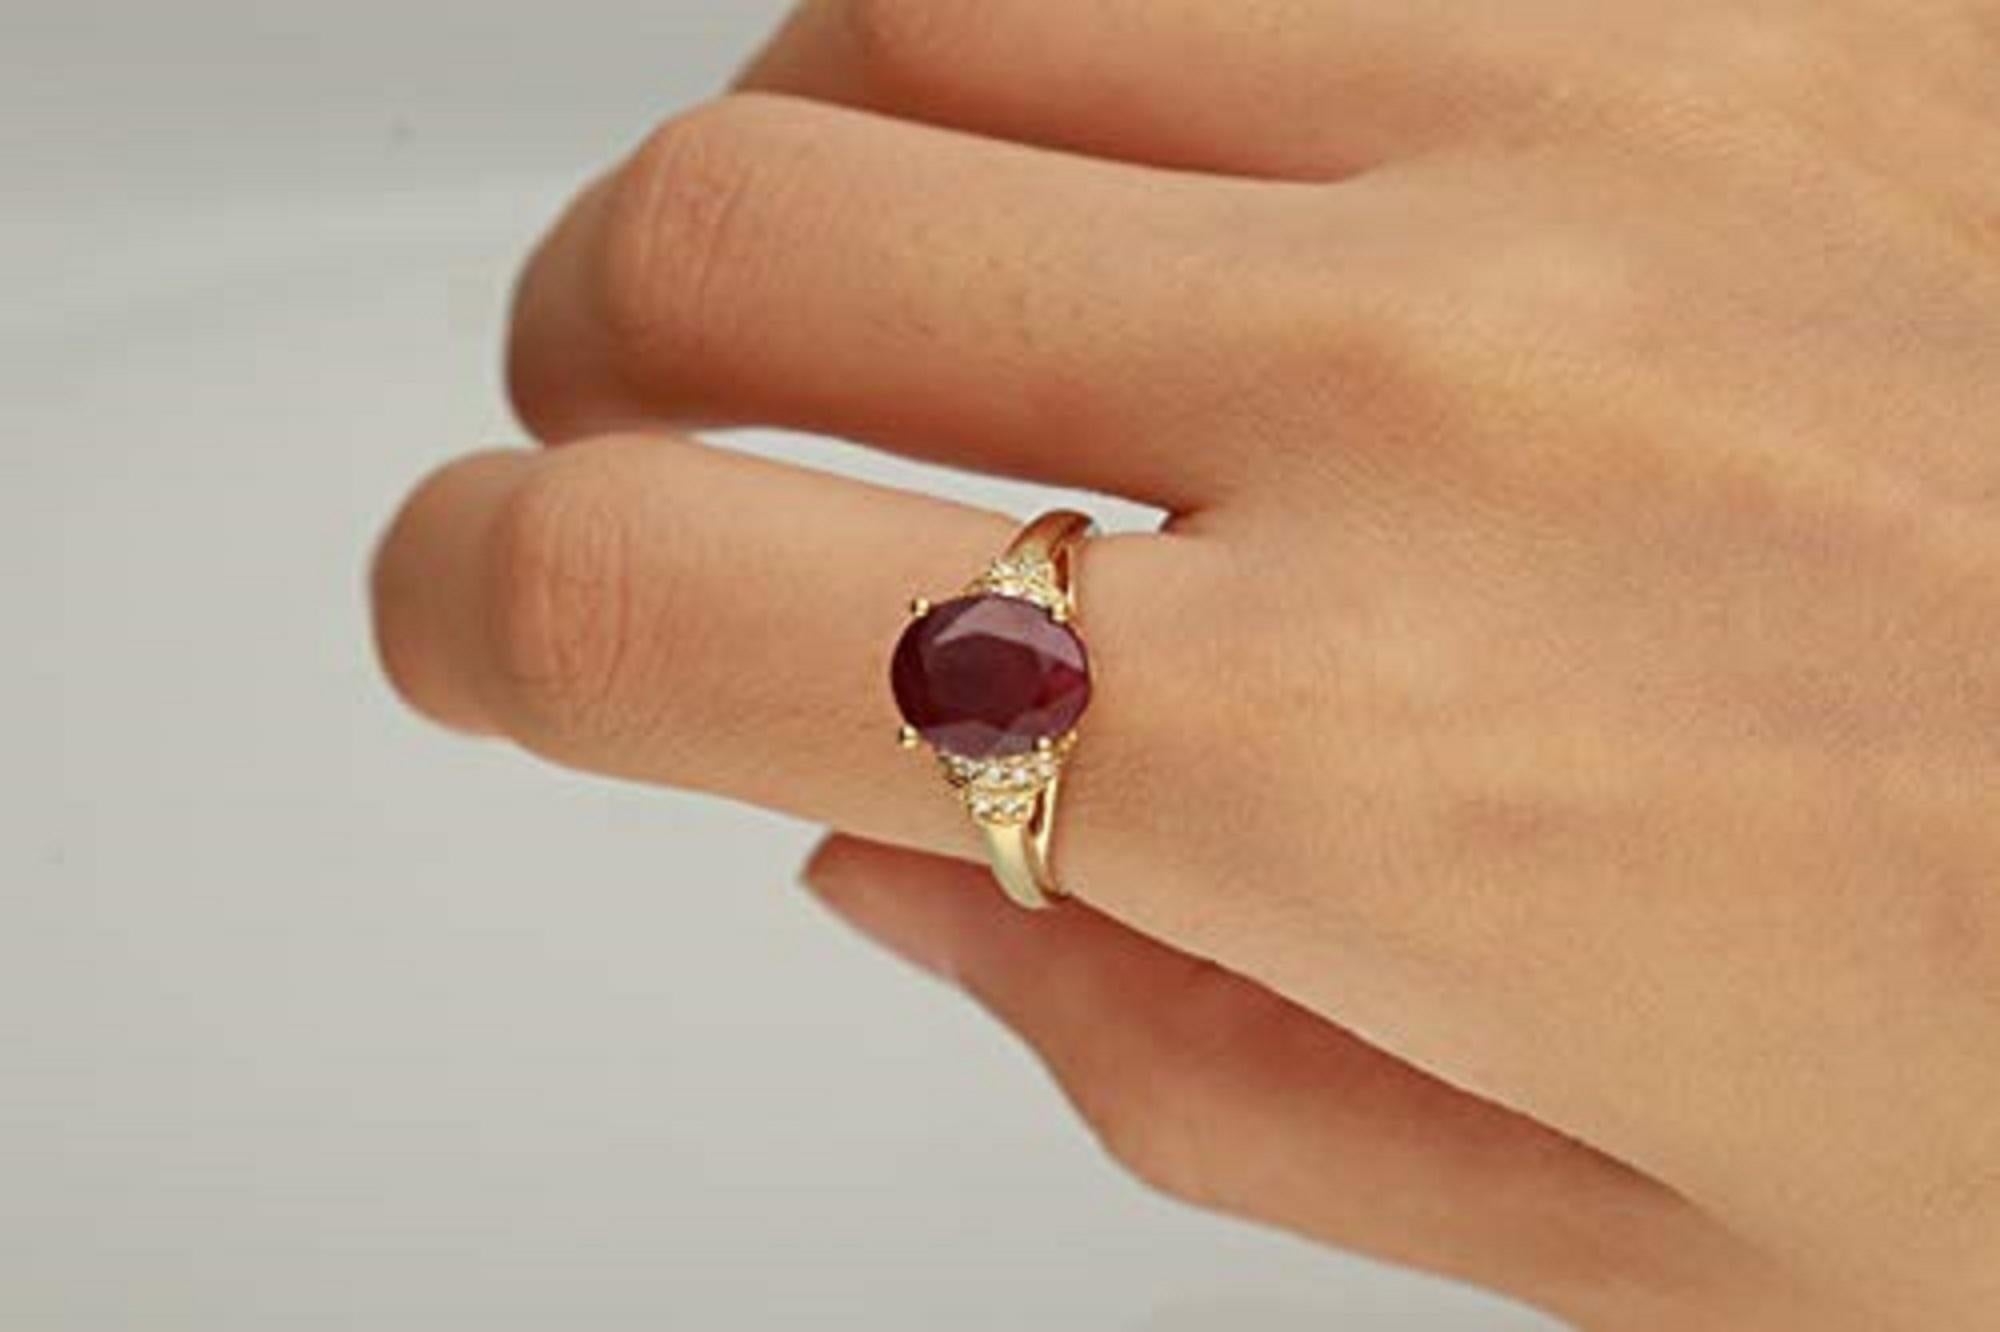 Decorate yourself in luxury with this Gin & Grace ring. The 14k Yellow Gold jewelry boasts 8X10 Oval-Cut Prong Setting Ruby stone (1pcs) 3.55 Carat, and Round-Cut Prong Setting (16pcs) 0.11 Carat white diamond accent stones for a glimmering design.